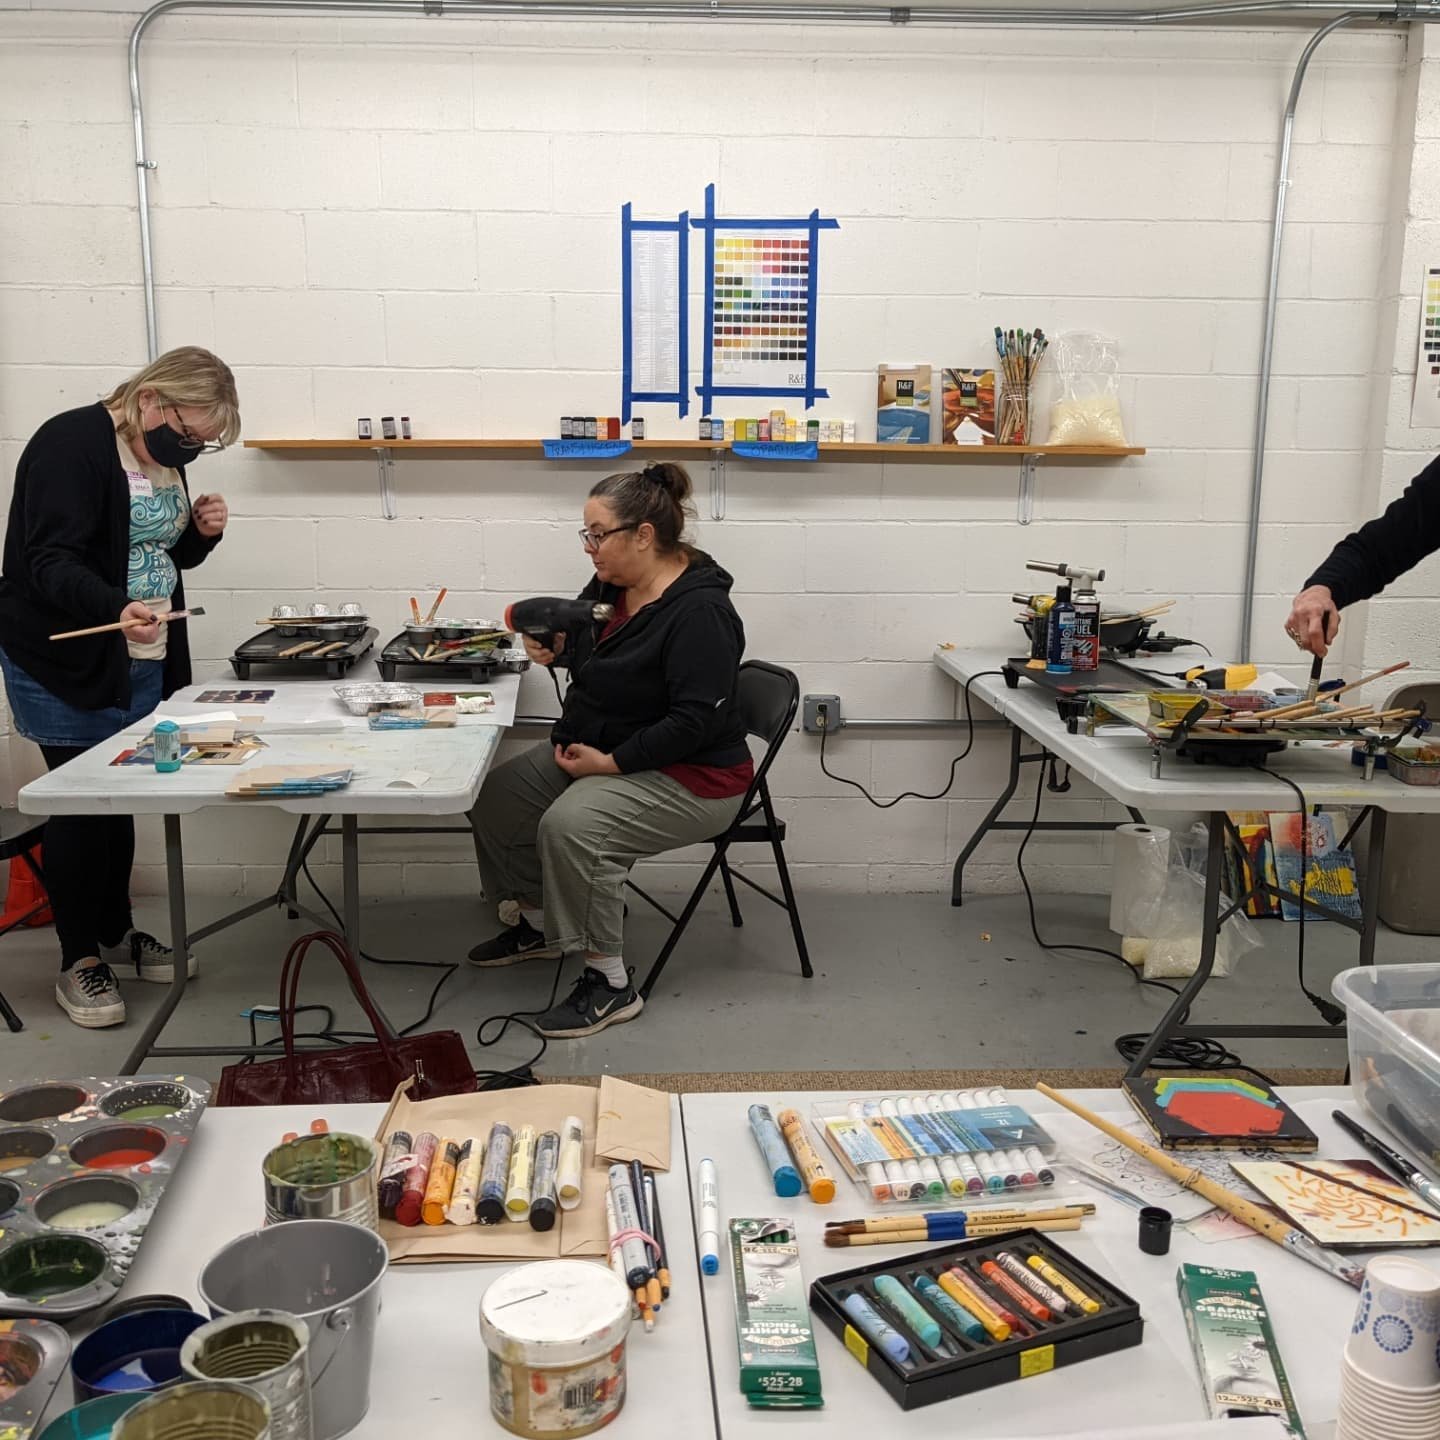 Thanks so much to the Arlene's Artist Materials for a fun workshop yesterday in Encaustic Essentials. And big shout out to R&amp;F Handmade paints for their generous donation and support for the class. And finally thanks to a really fun group of work